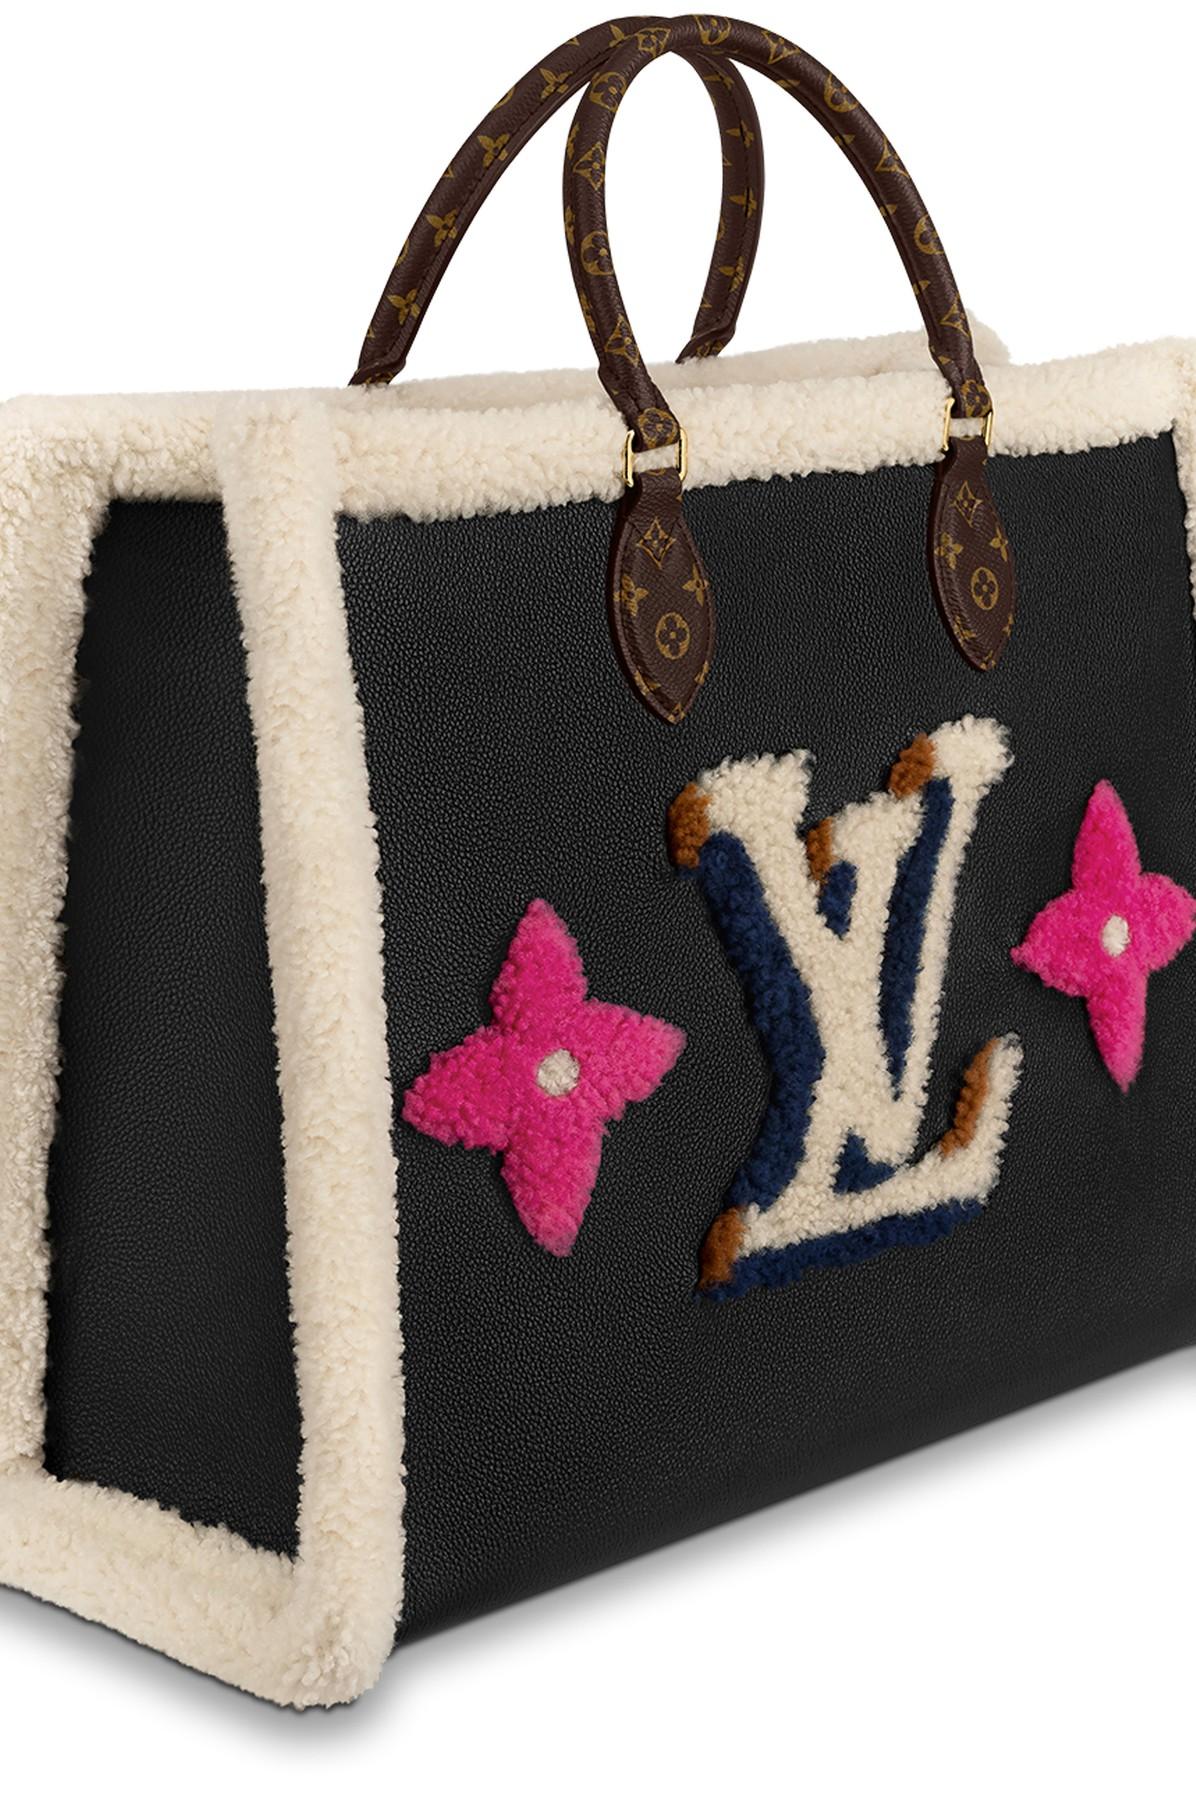 Louis+Vuitton+OnTheGo+Tote+GM+Blue+Canvas for sale online